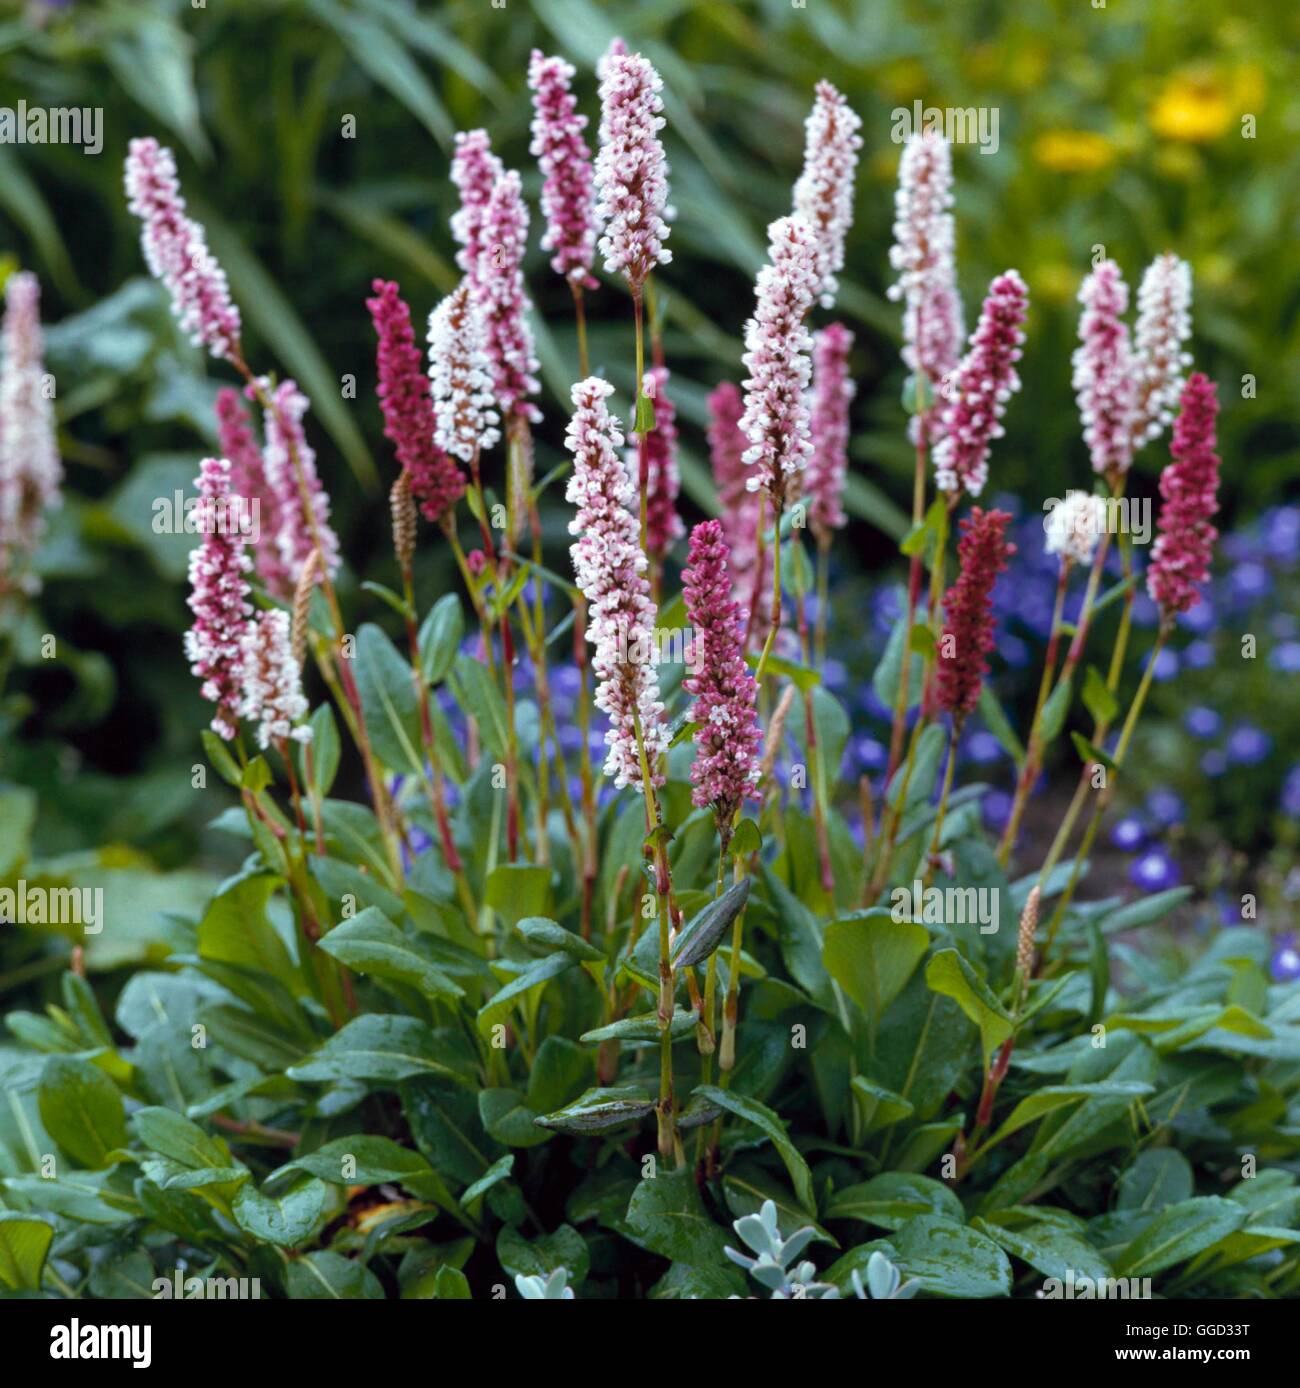 Persicaria affinis - 'Donald Lowndes' - (Syn Polygonum affine 'Donald Lowndes')   ALP027657     Phot Stock Photo